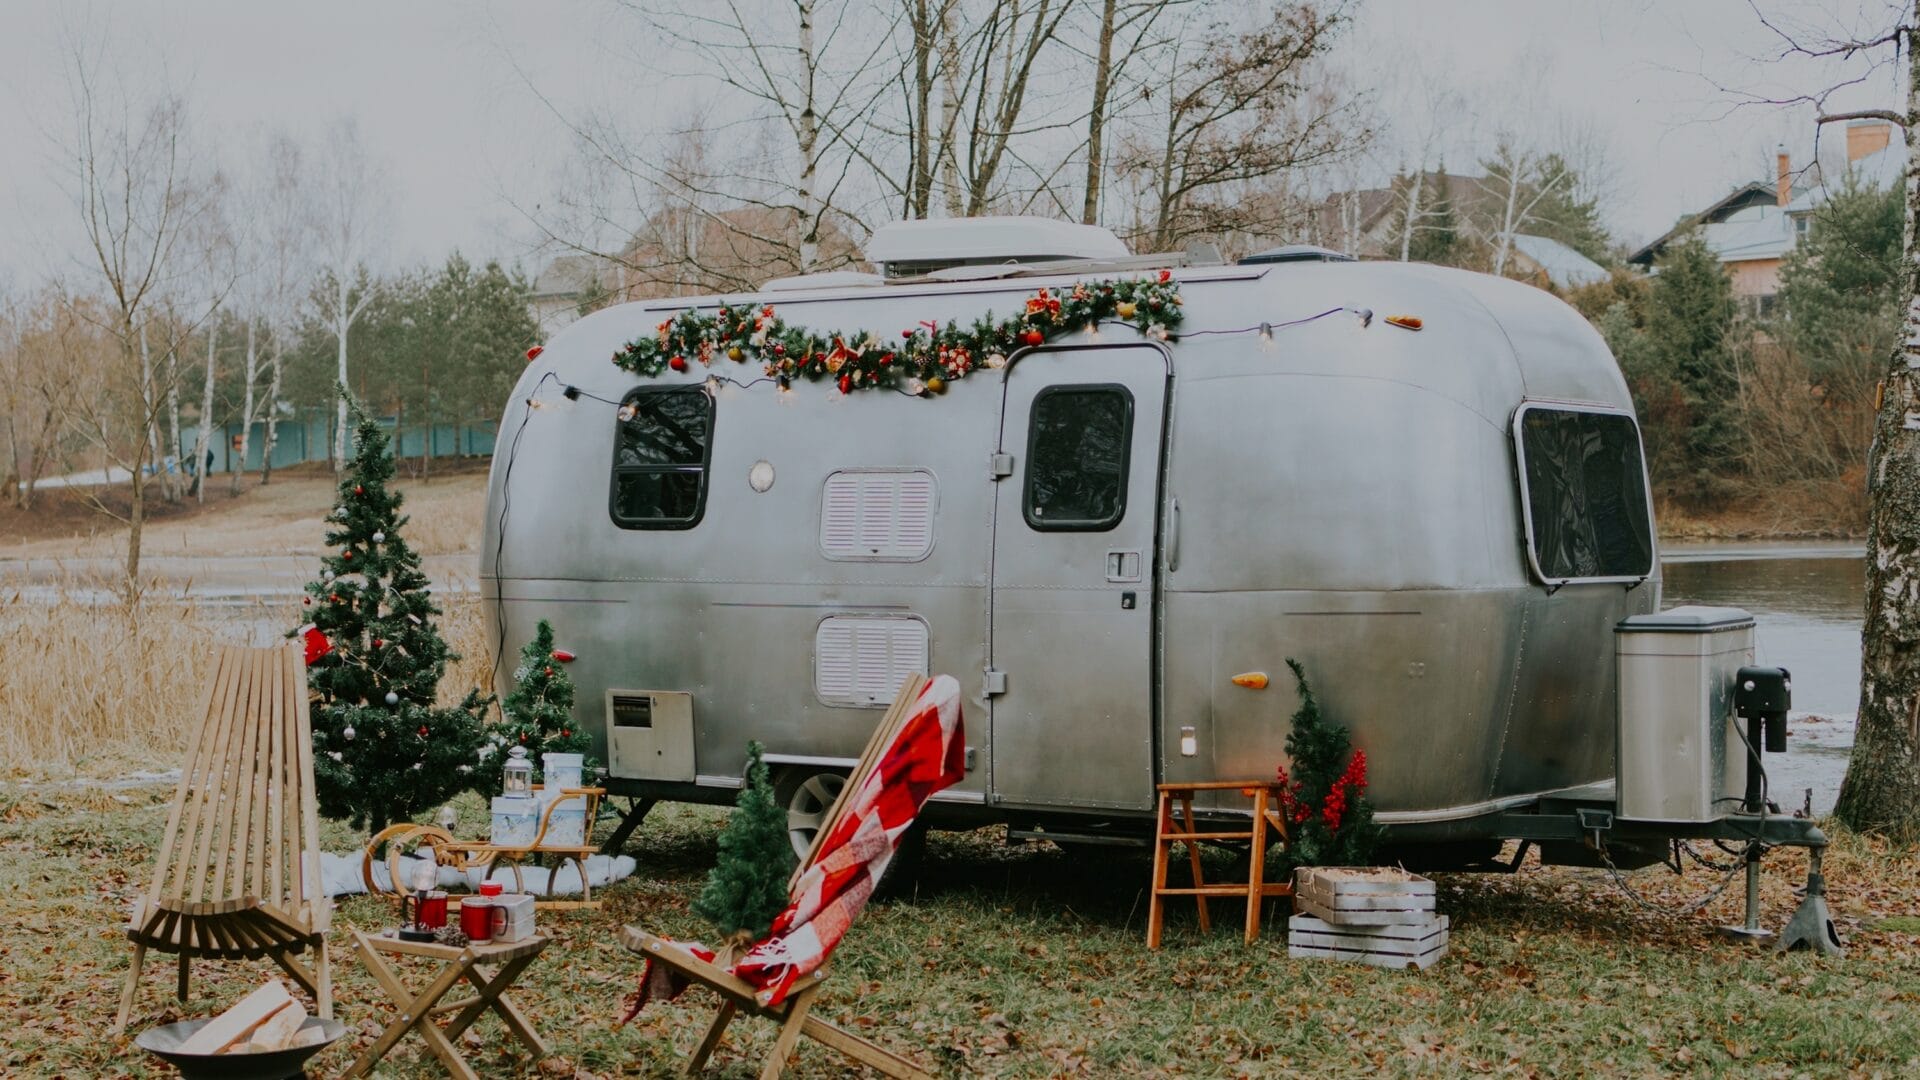 Get the free guide to celebrating the holidays at the campground